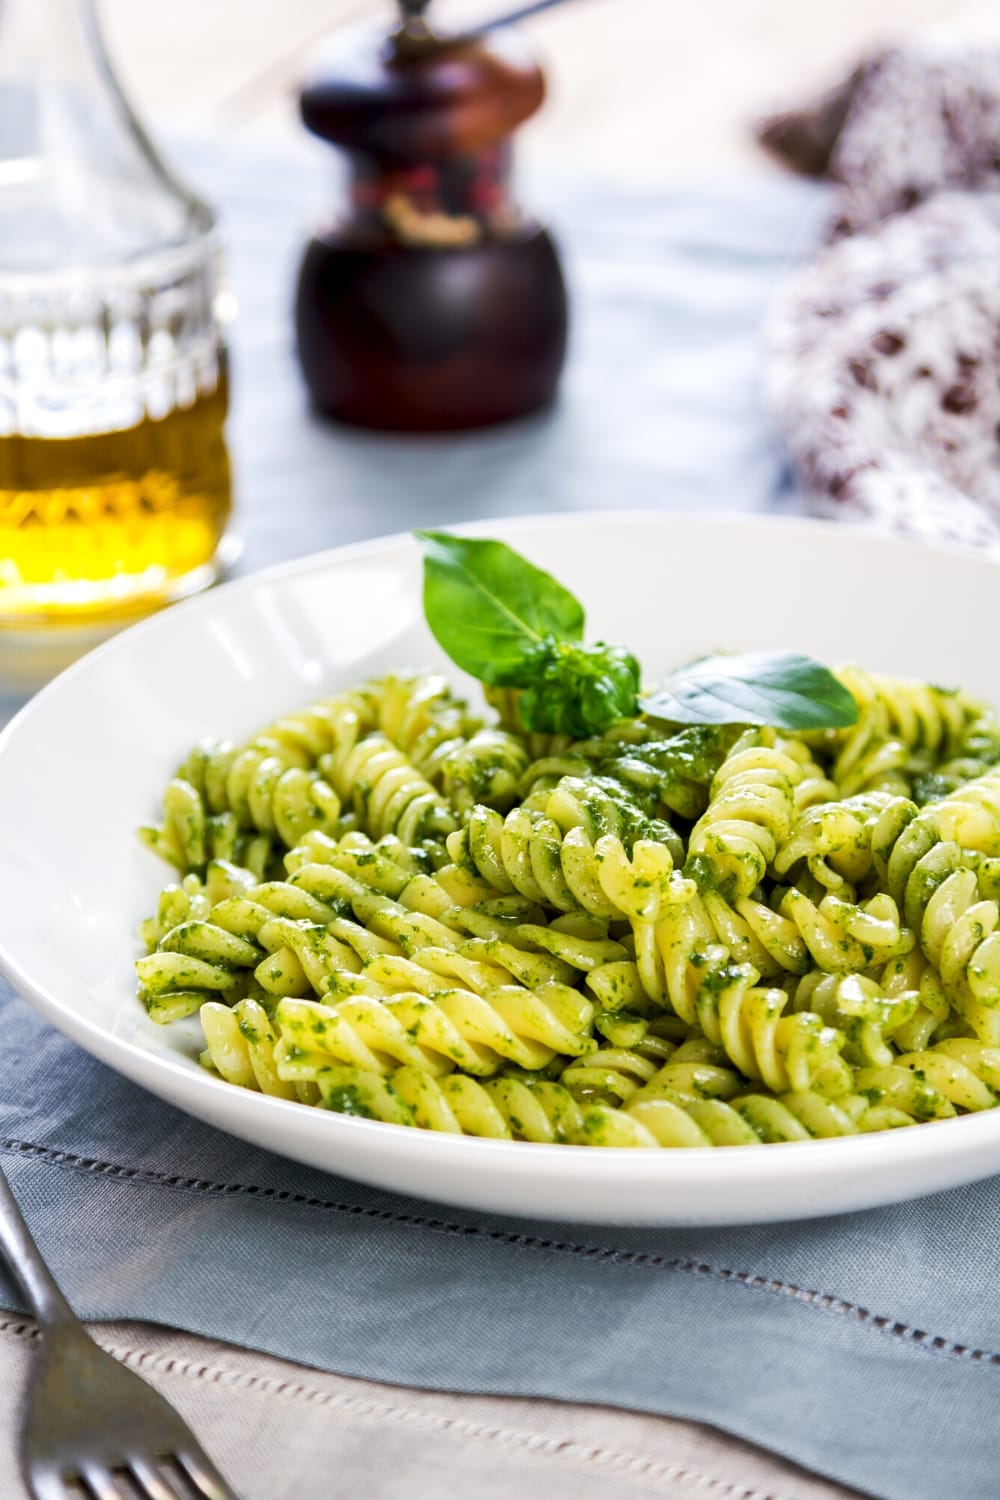 Spiral pasta with pesto sauce garnished with basil leaves. 